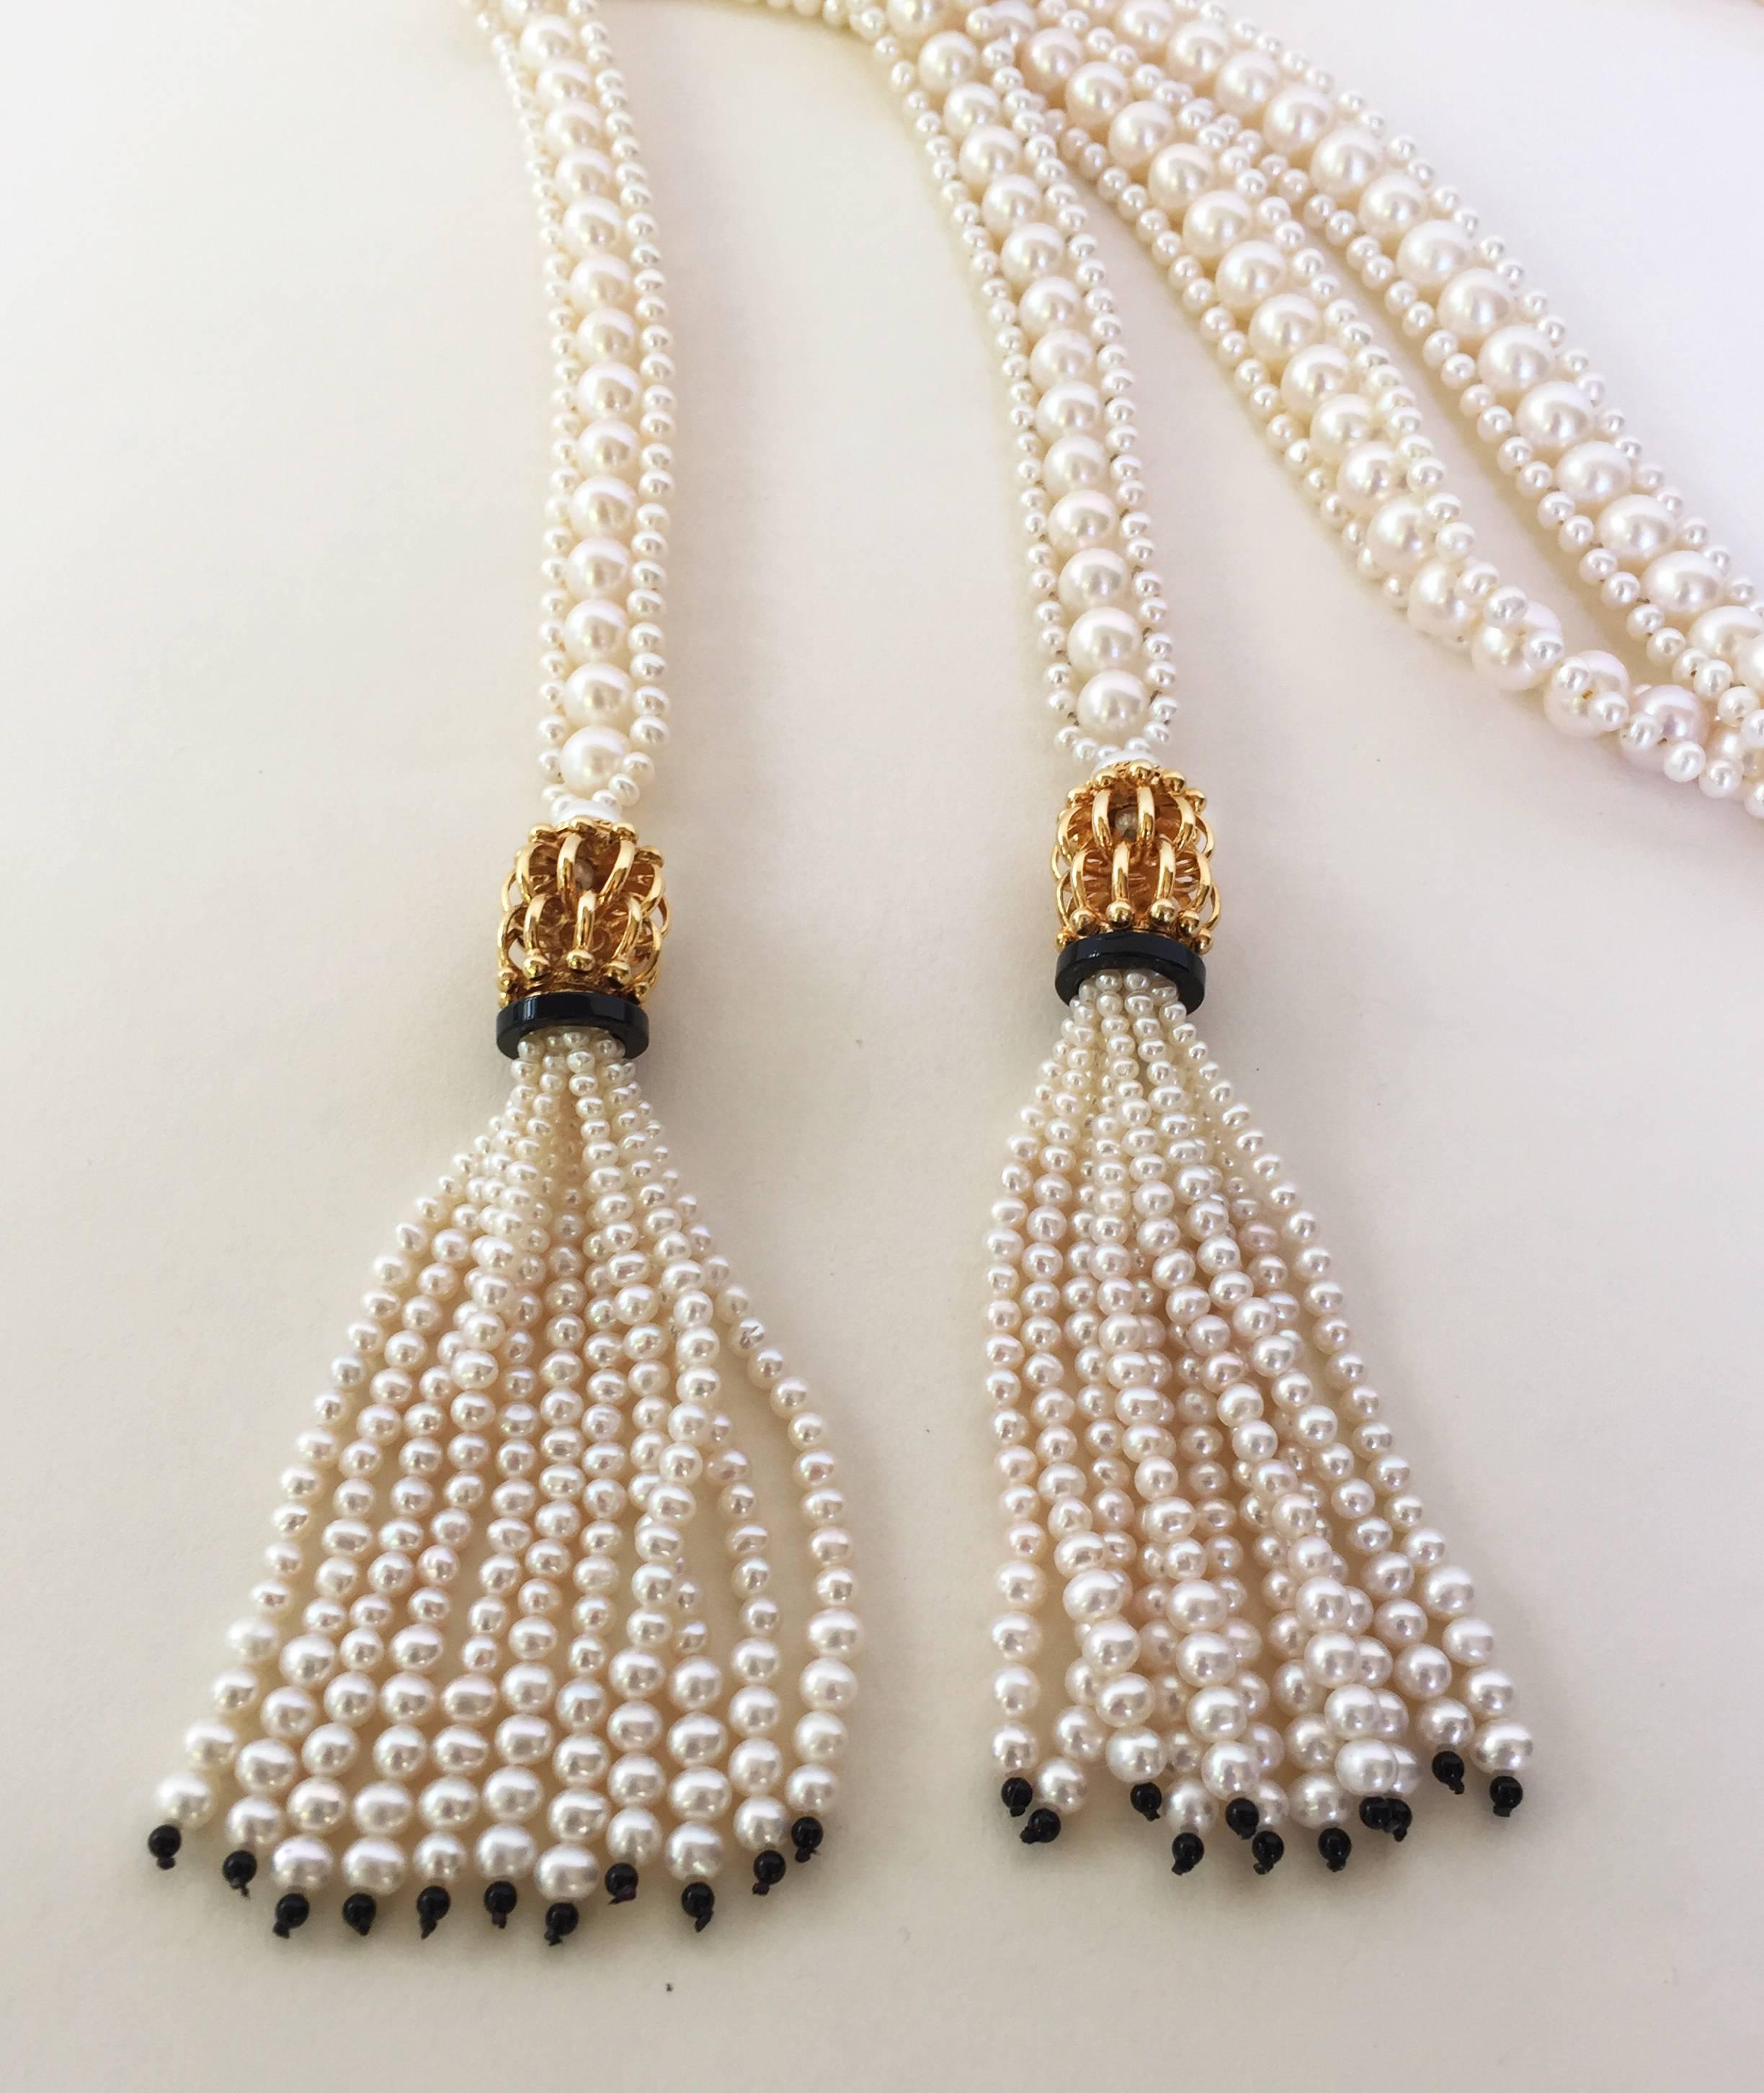 Women's White Woven Pearl Sautoir with Pearl Tassels and Onyx Detailing by Marina J